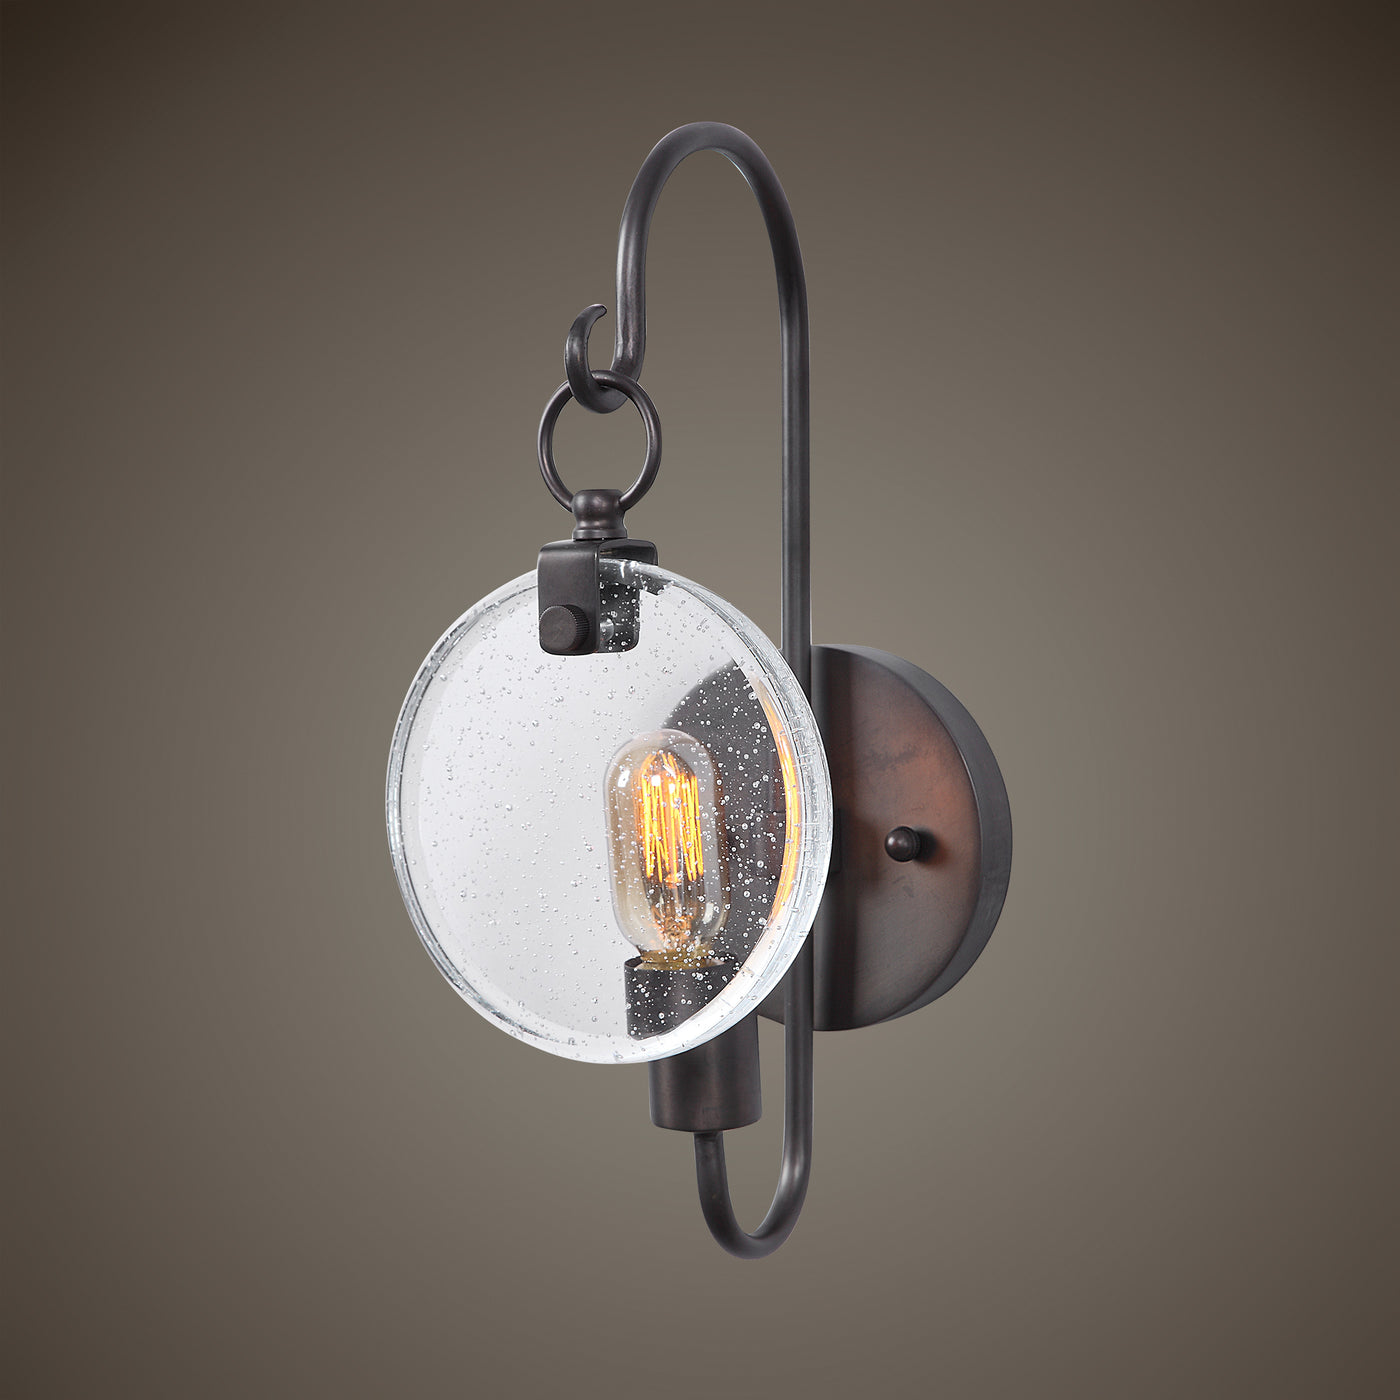 Transitional Style 1 Lt. Wall Sconce Pulls In Bits Of Nostalgia And Modernity.  In A Acid Oxidized Dark Bronze Finish Feat...